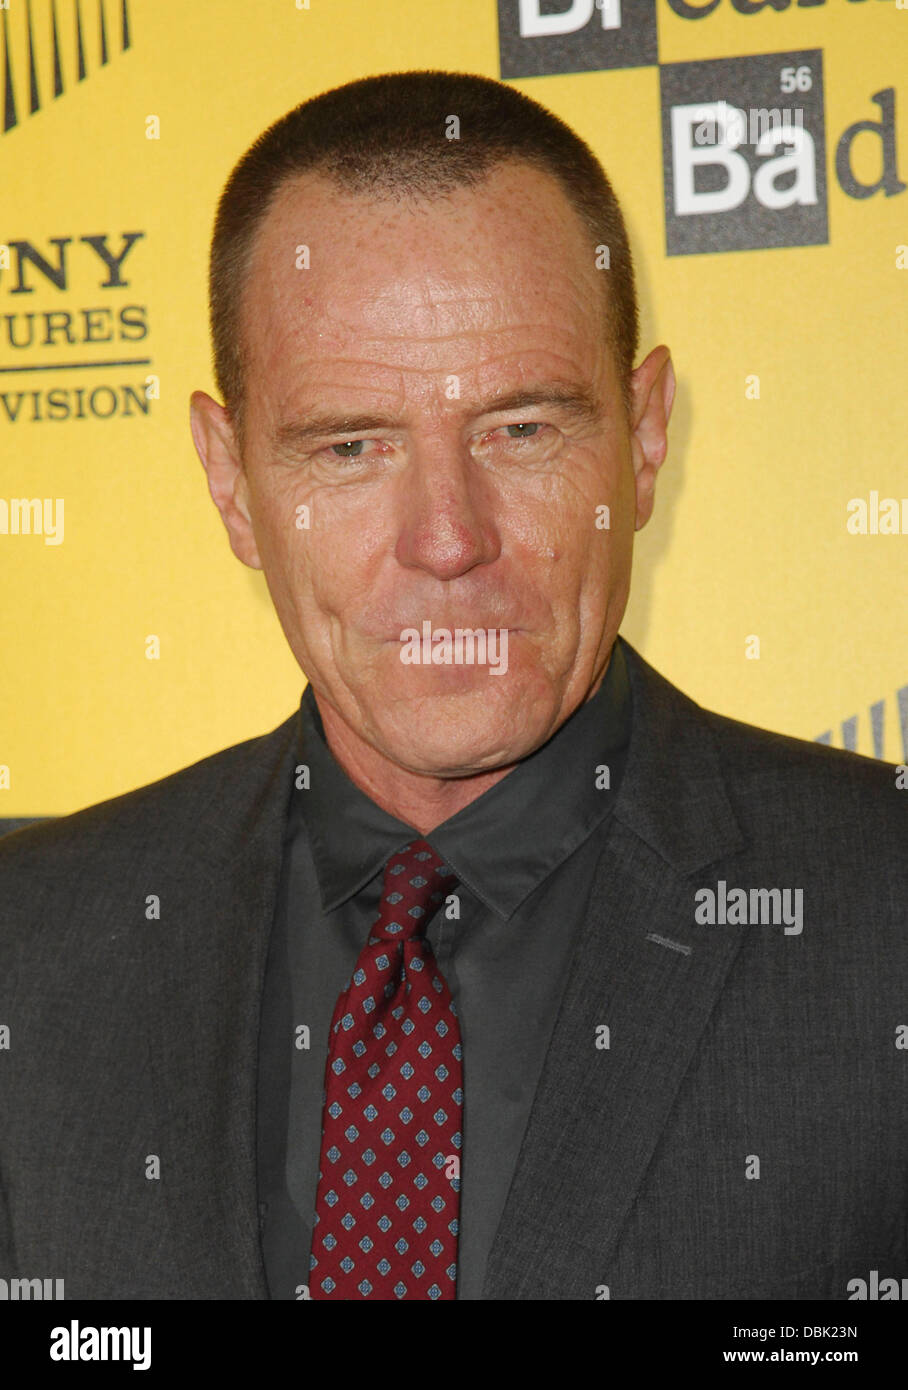 Bryan Cranston The Premiere of 'Breaking Bad' Season Four held at The Chinese 6 Theatres Los Angeles, California - 28.06.11 Stock Photo